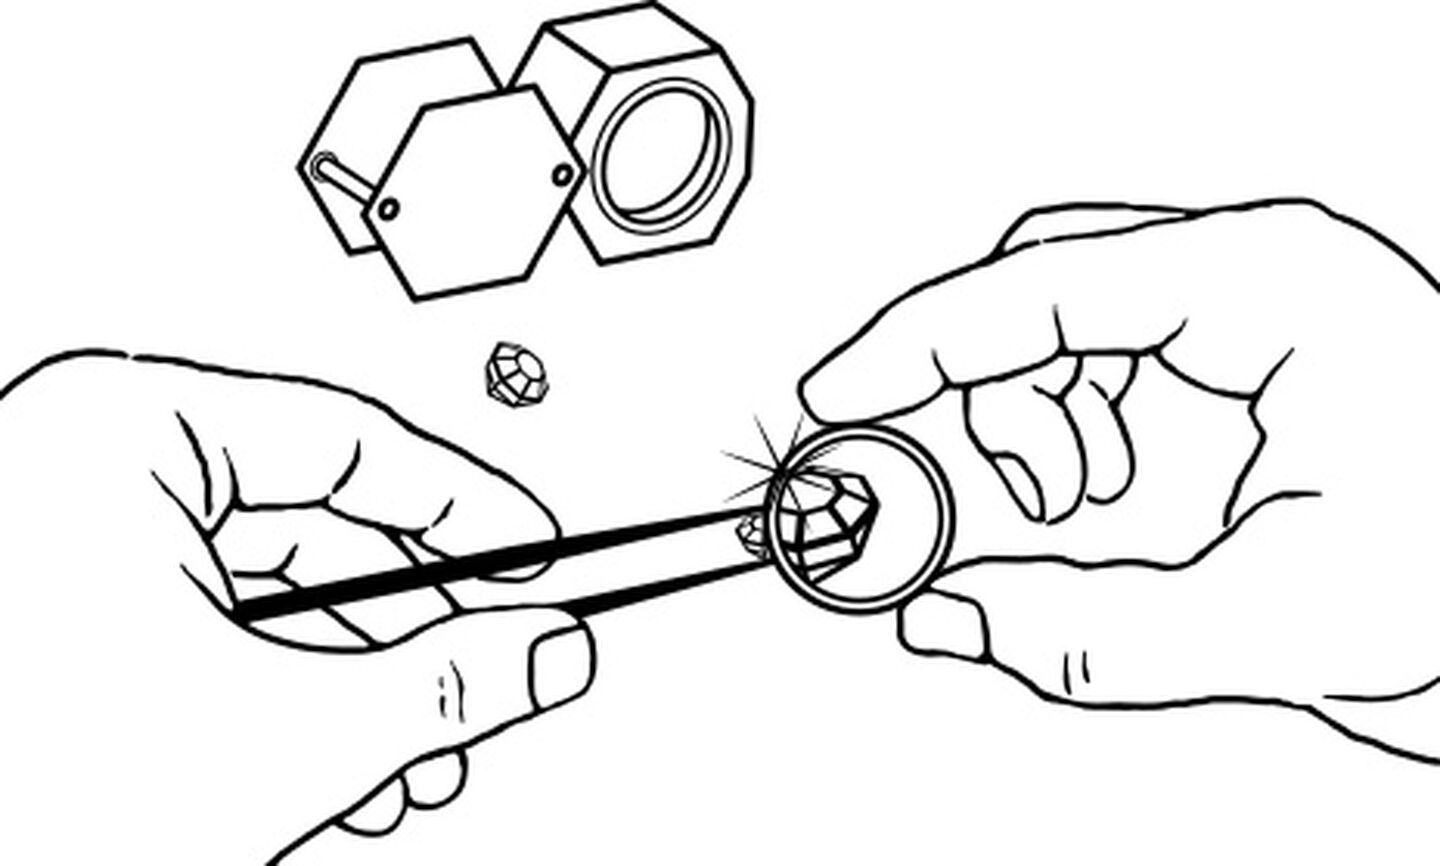 An illustration of a hand inspecting a diamond.